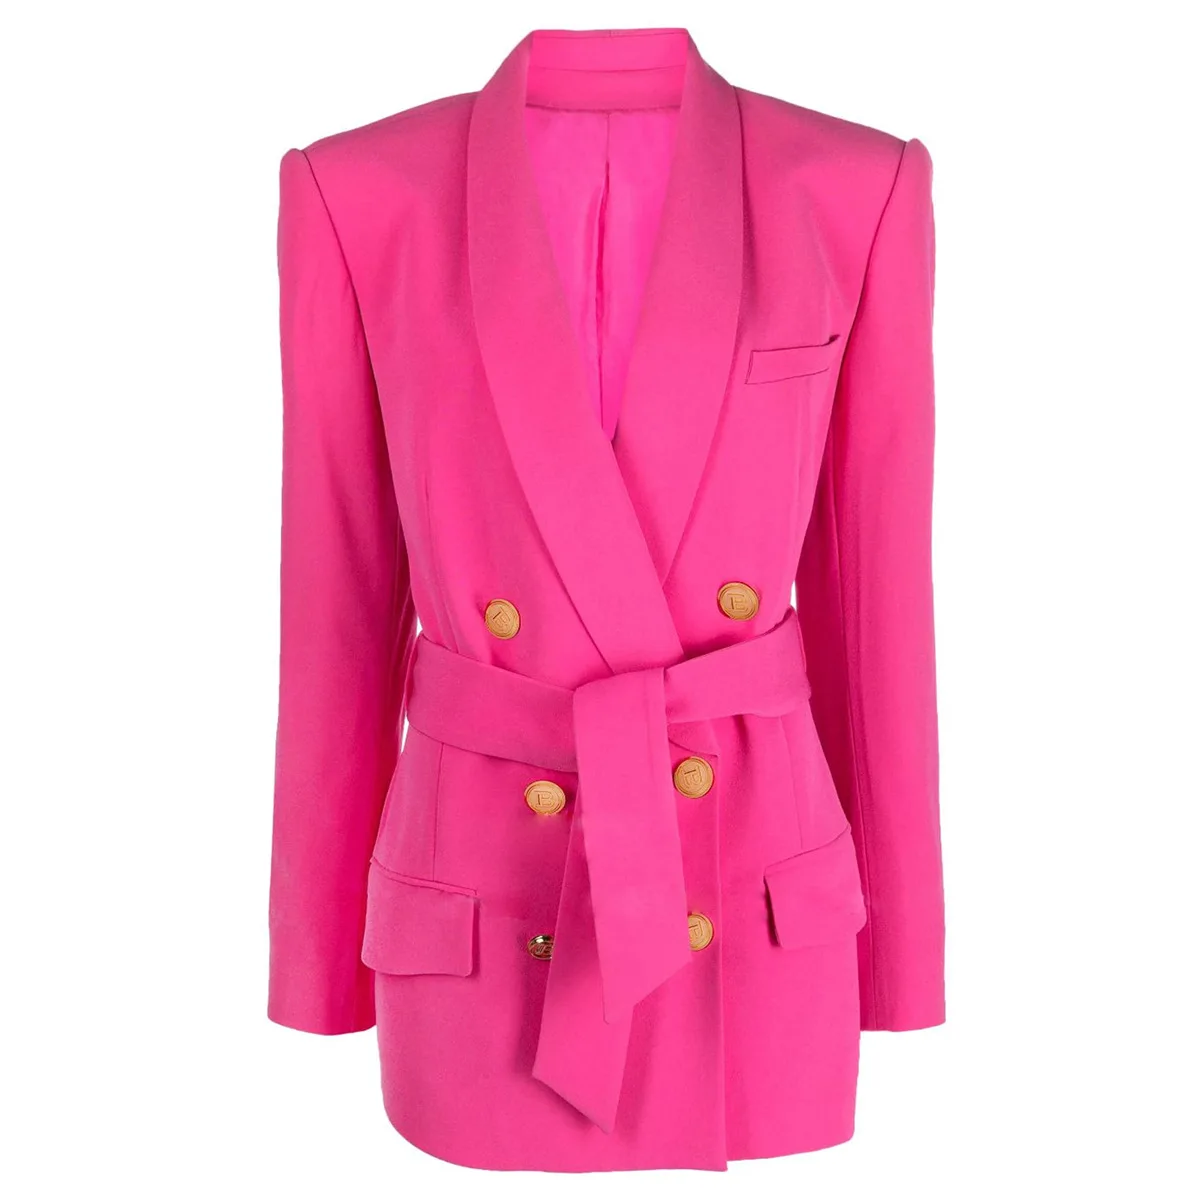 Elegant Design Female Formal Wear Jacket Shawl Collar With Belt Double Breasted Quality Ladies Blazer Solid 3 Color Women's Suit